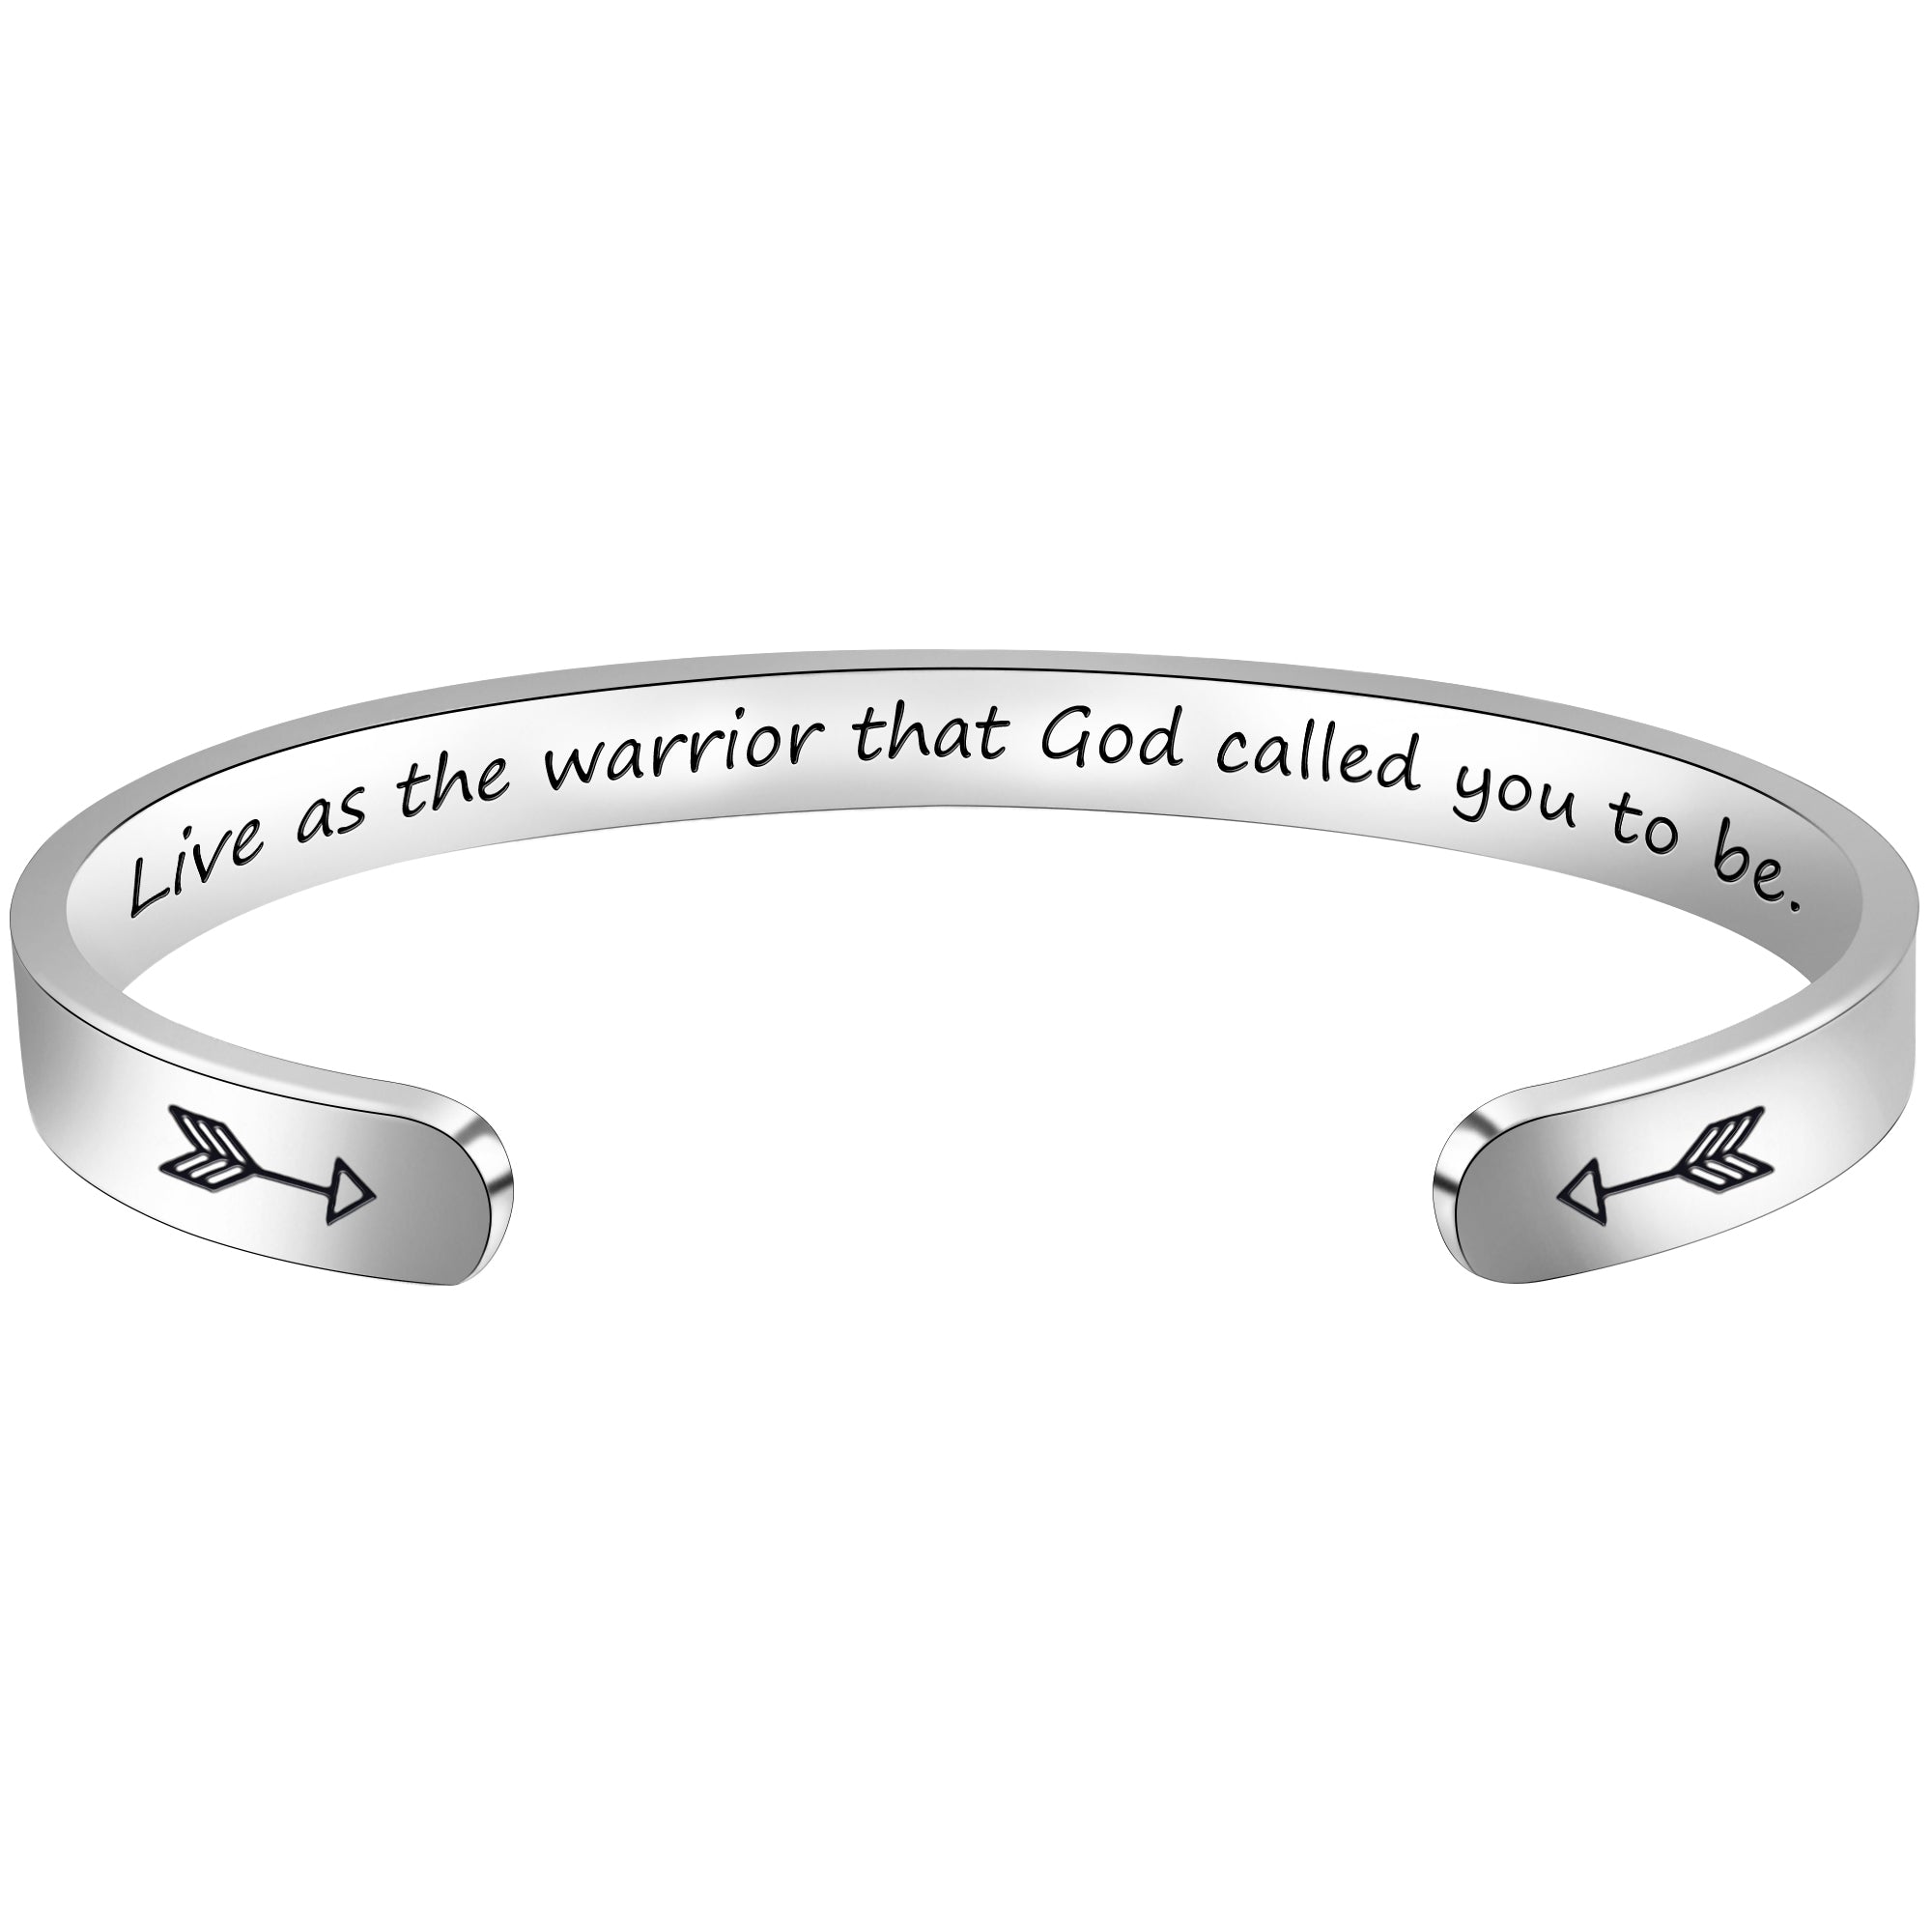 Live as the warrior that god called you to be